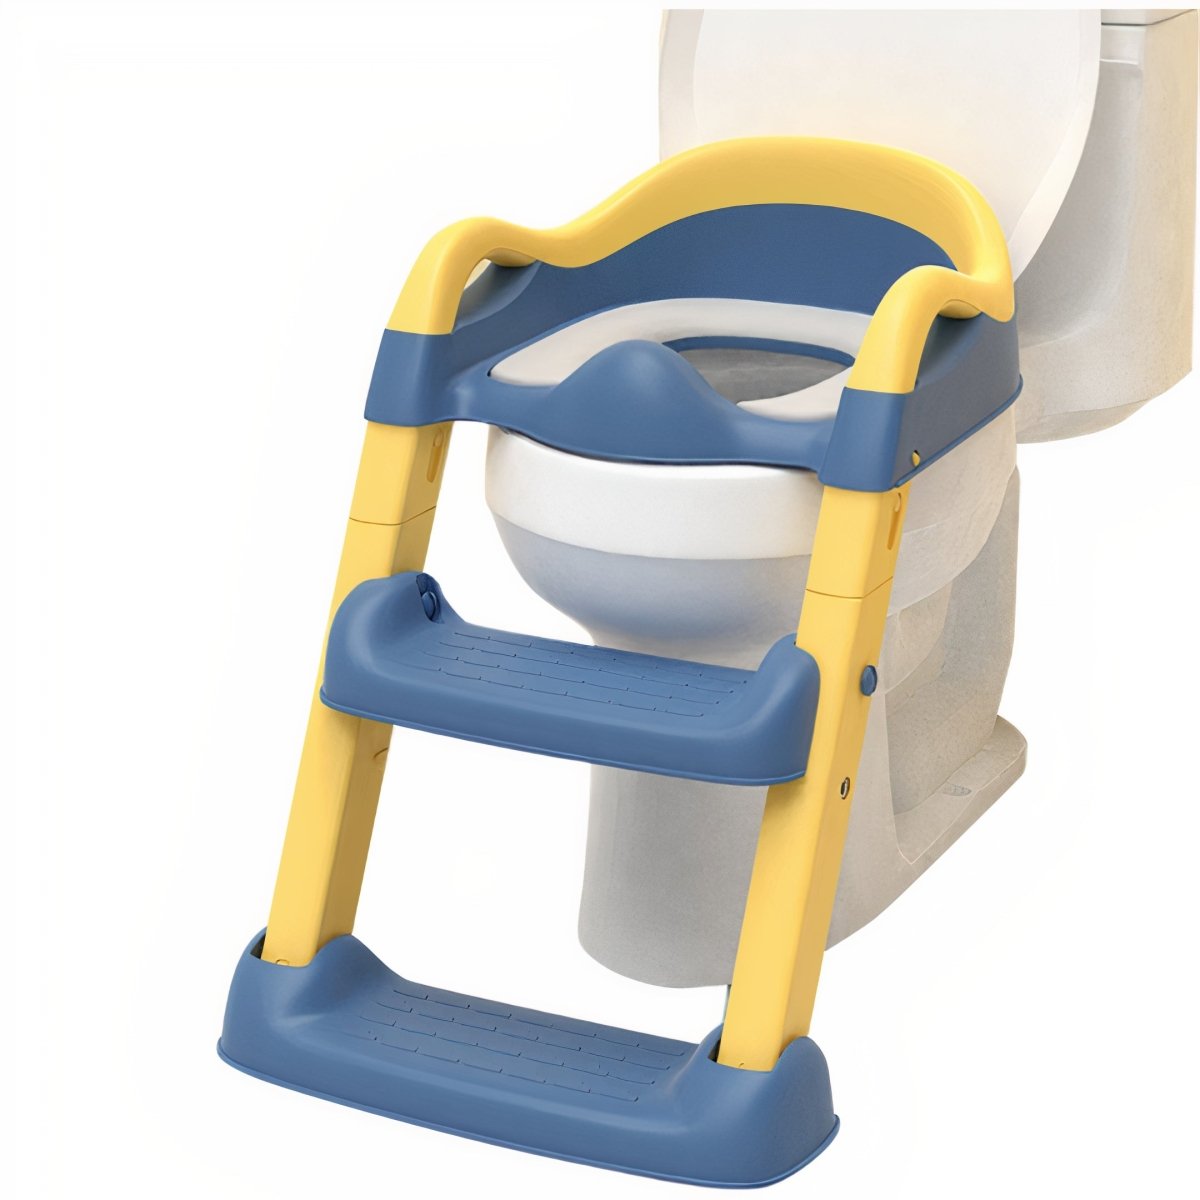 KidDough Baby Potty Training Seat with Ladder: Soft Comfortable Cushion Seat - potter